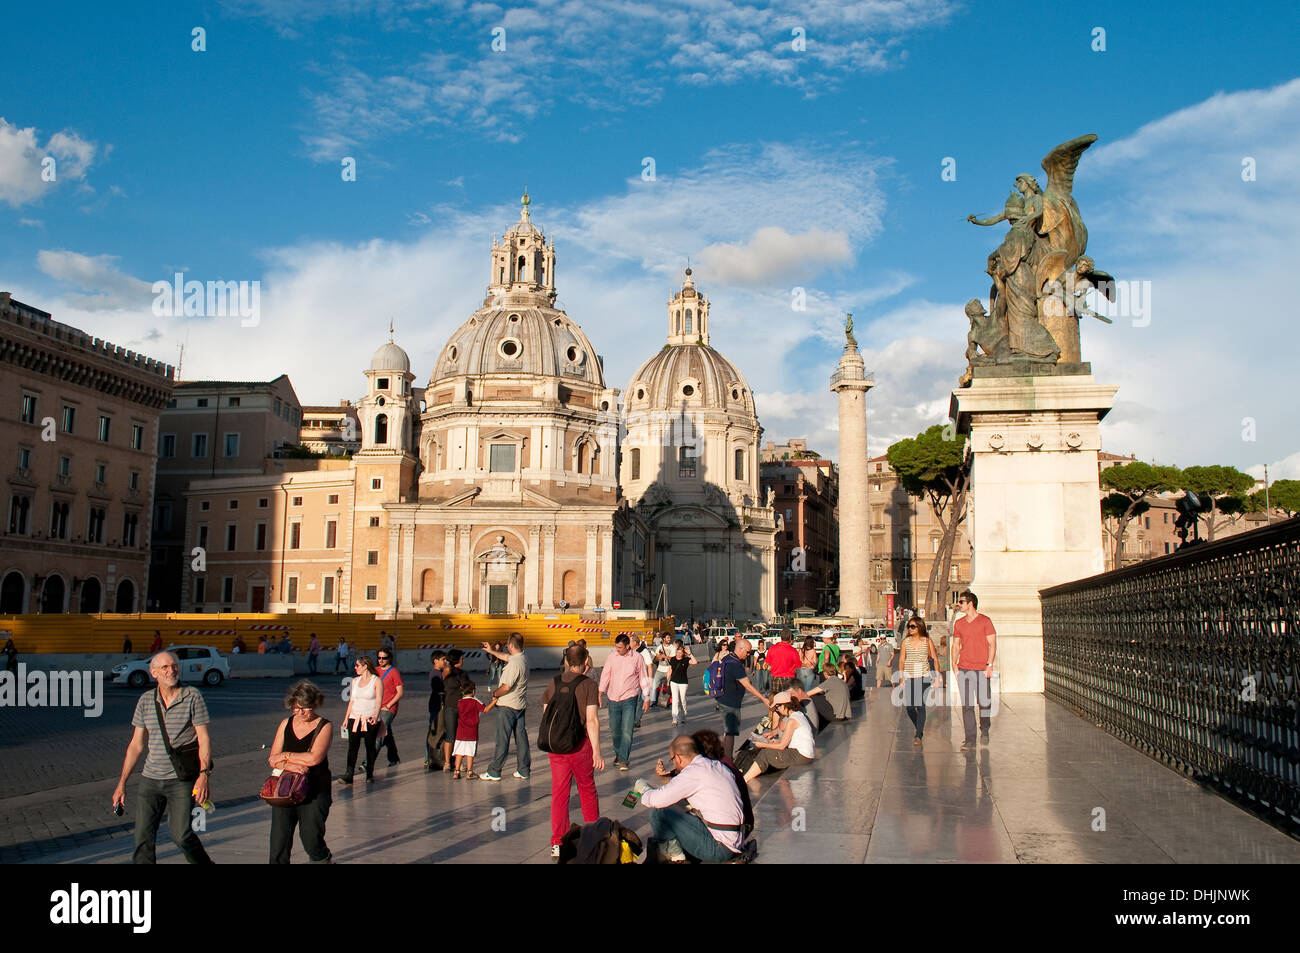 People in front of the Vittorio Emanuele II Monument with two churches and Trajan's Column behind, Rome, Italy Stock Photo